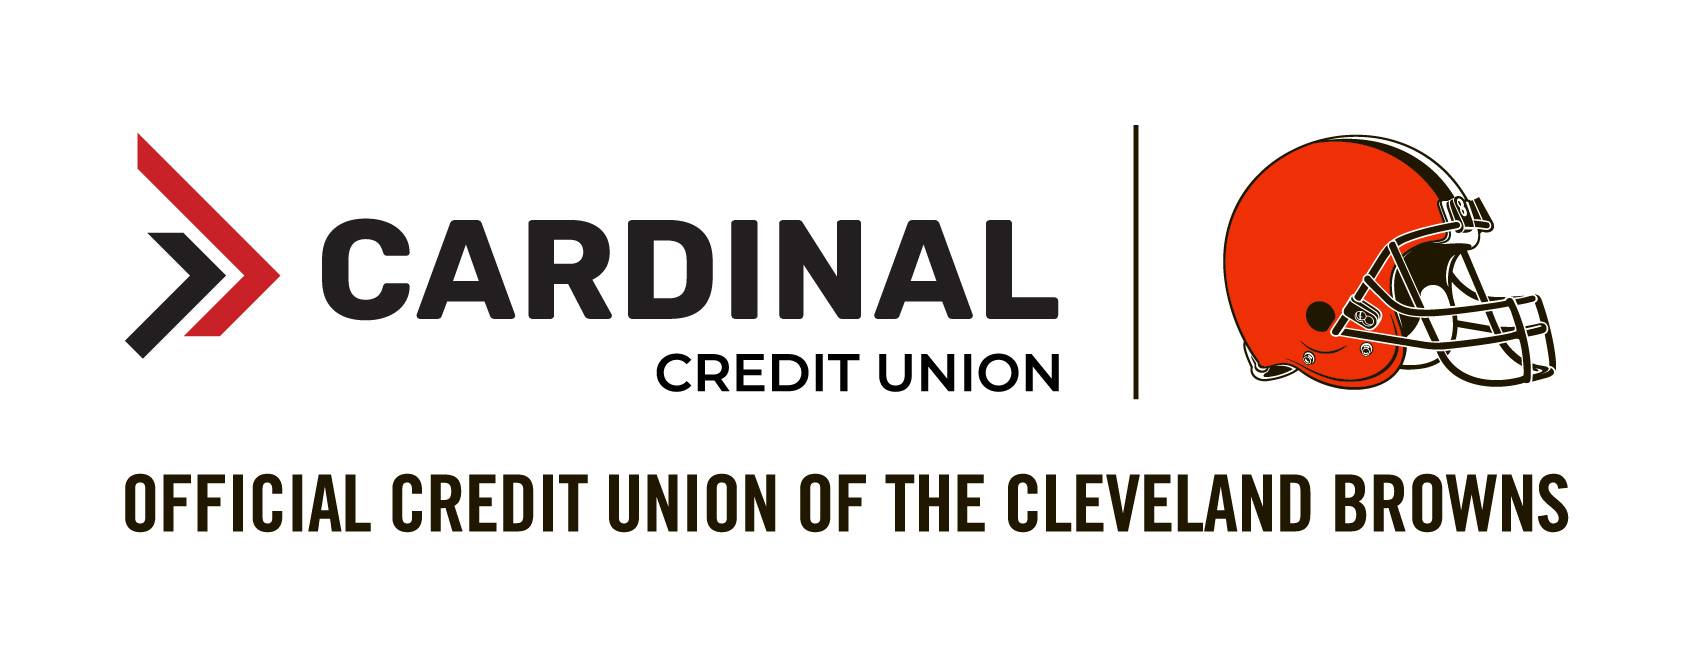 Cleveland Browns - Cardinal Credit Union